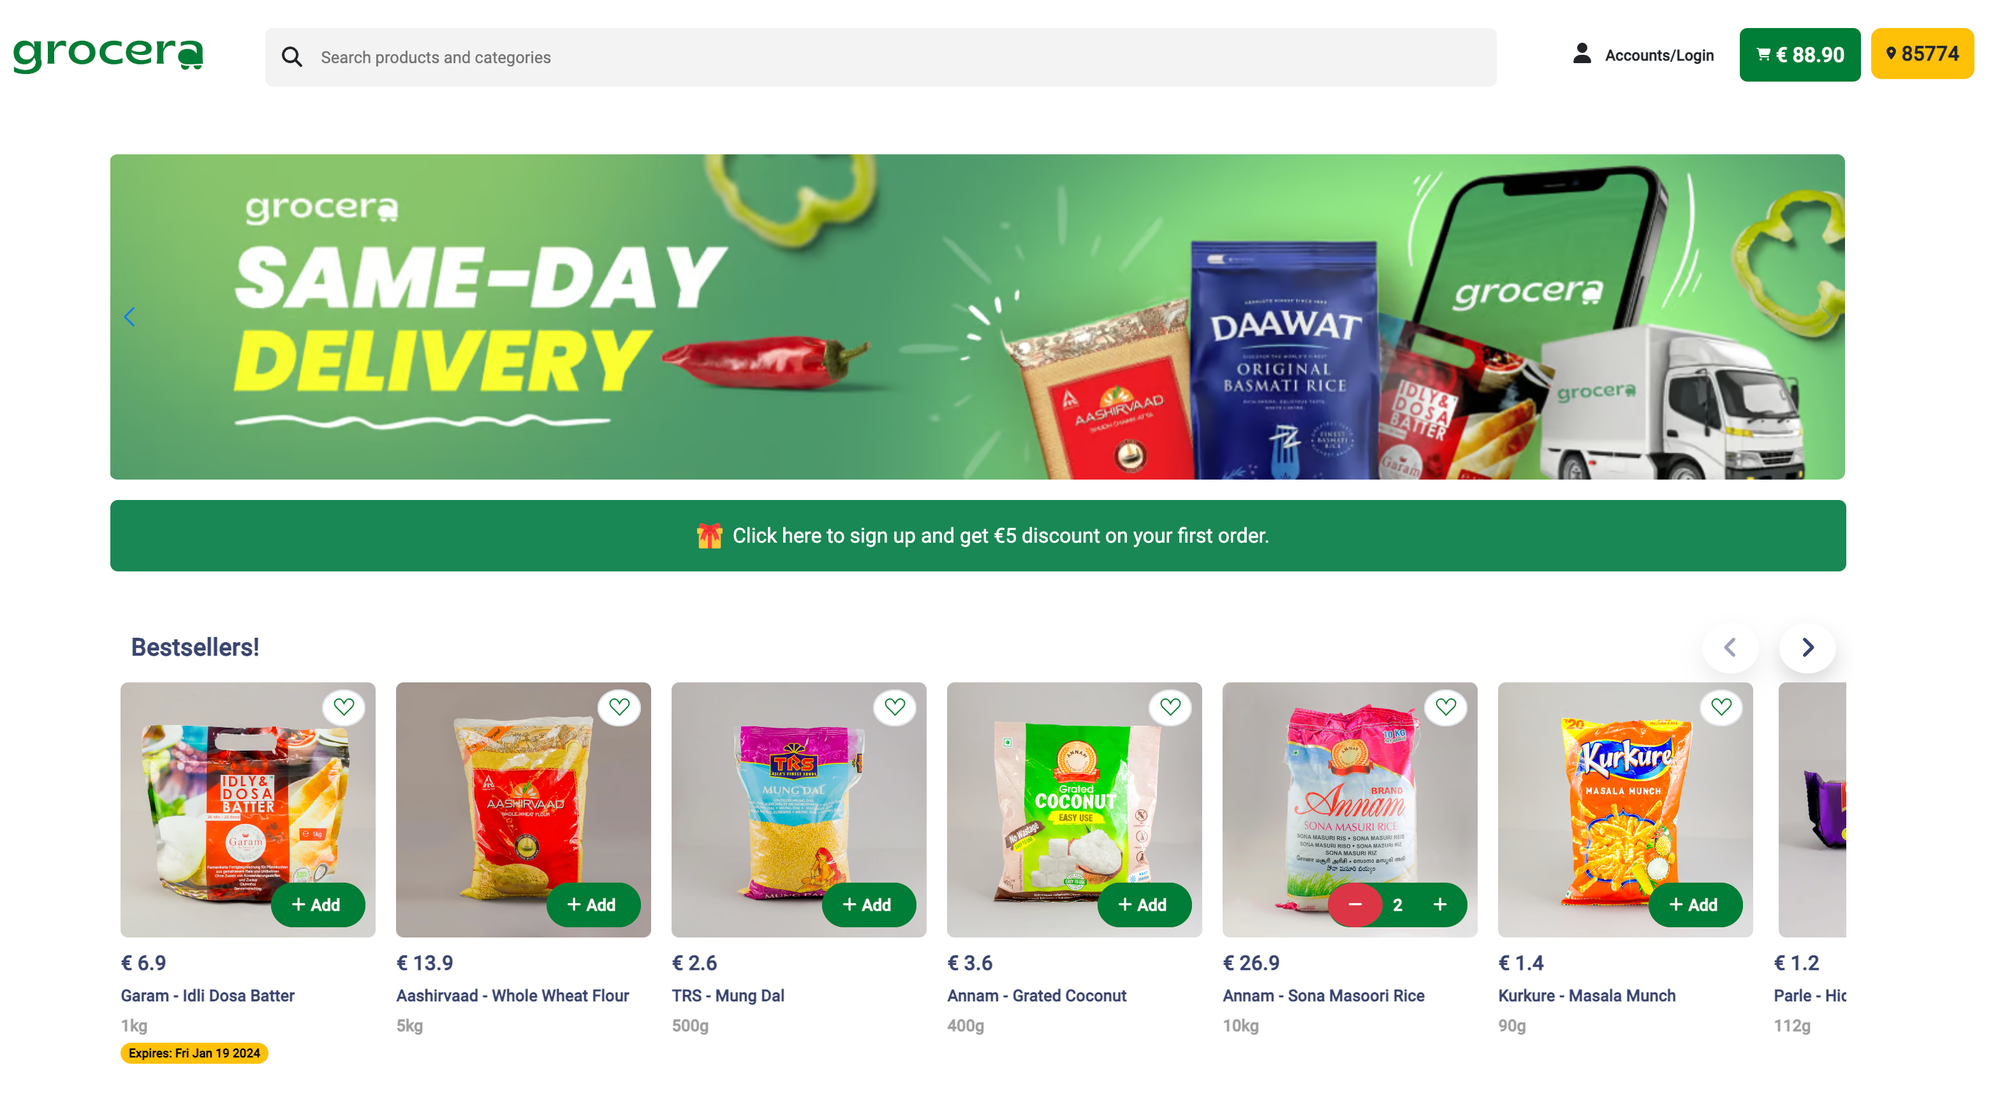 Indian groceries on grocera (home page of grocera.de)